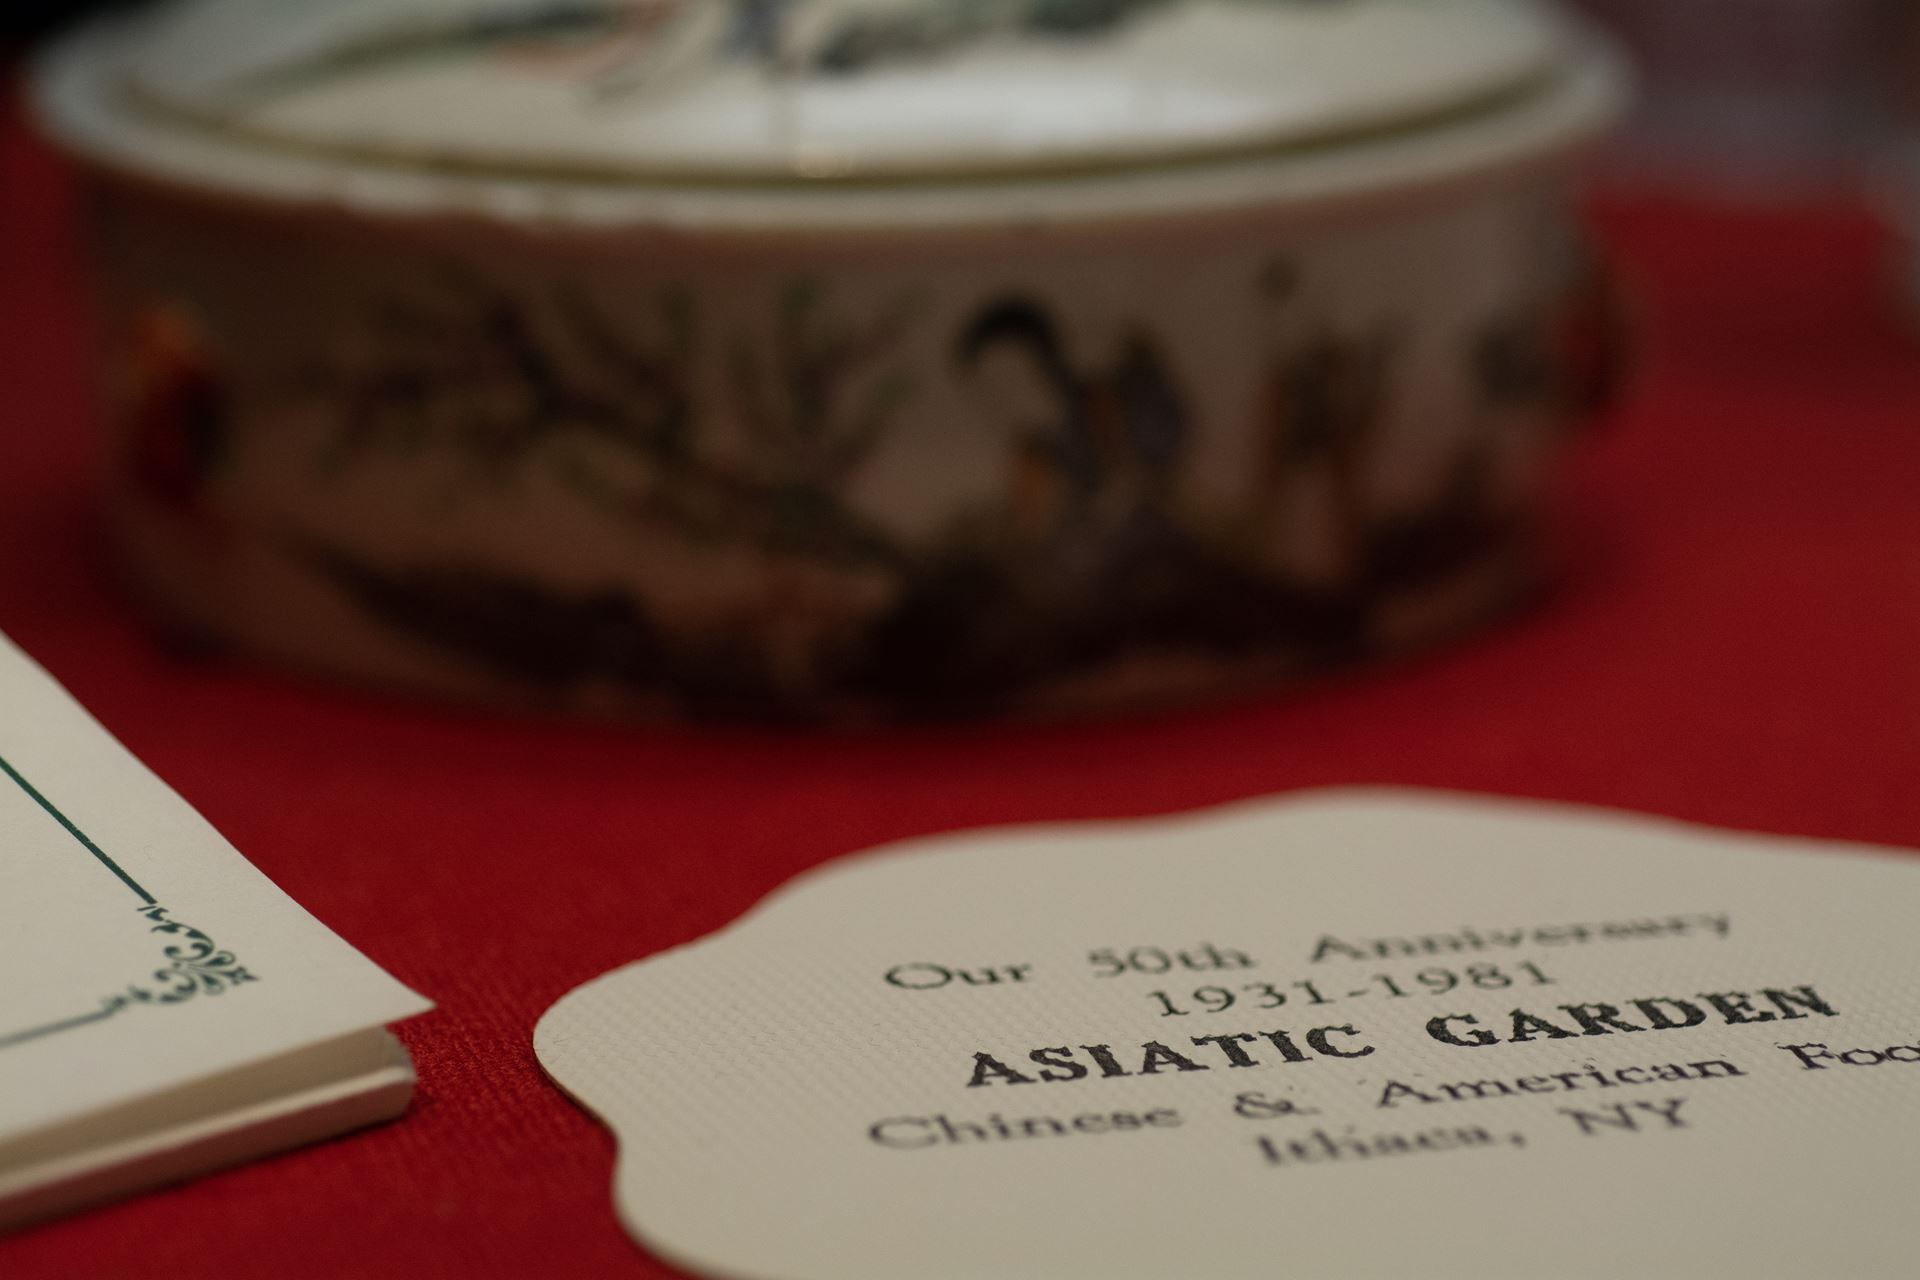 A small rectangular image of a label from an exhibit that reads "Our 50th Anniversay 1931-1981 ASIATIC GARDEN Chinese & American ... Ithaca. NY"